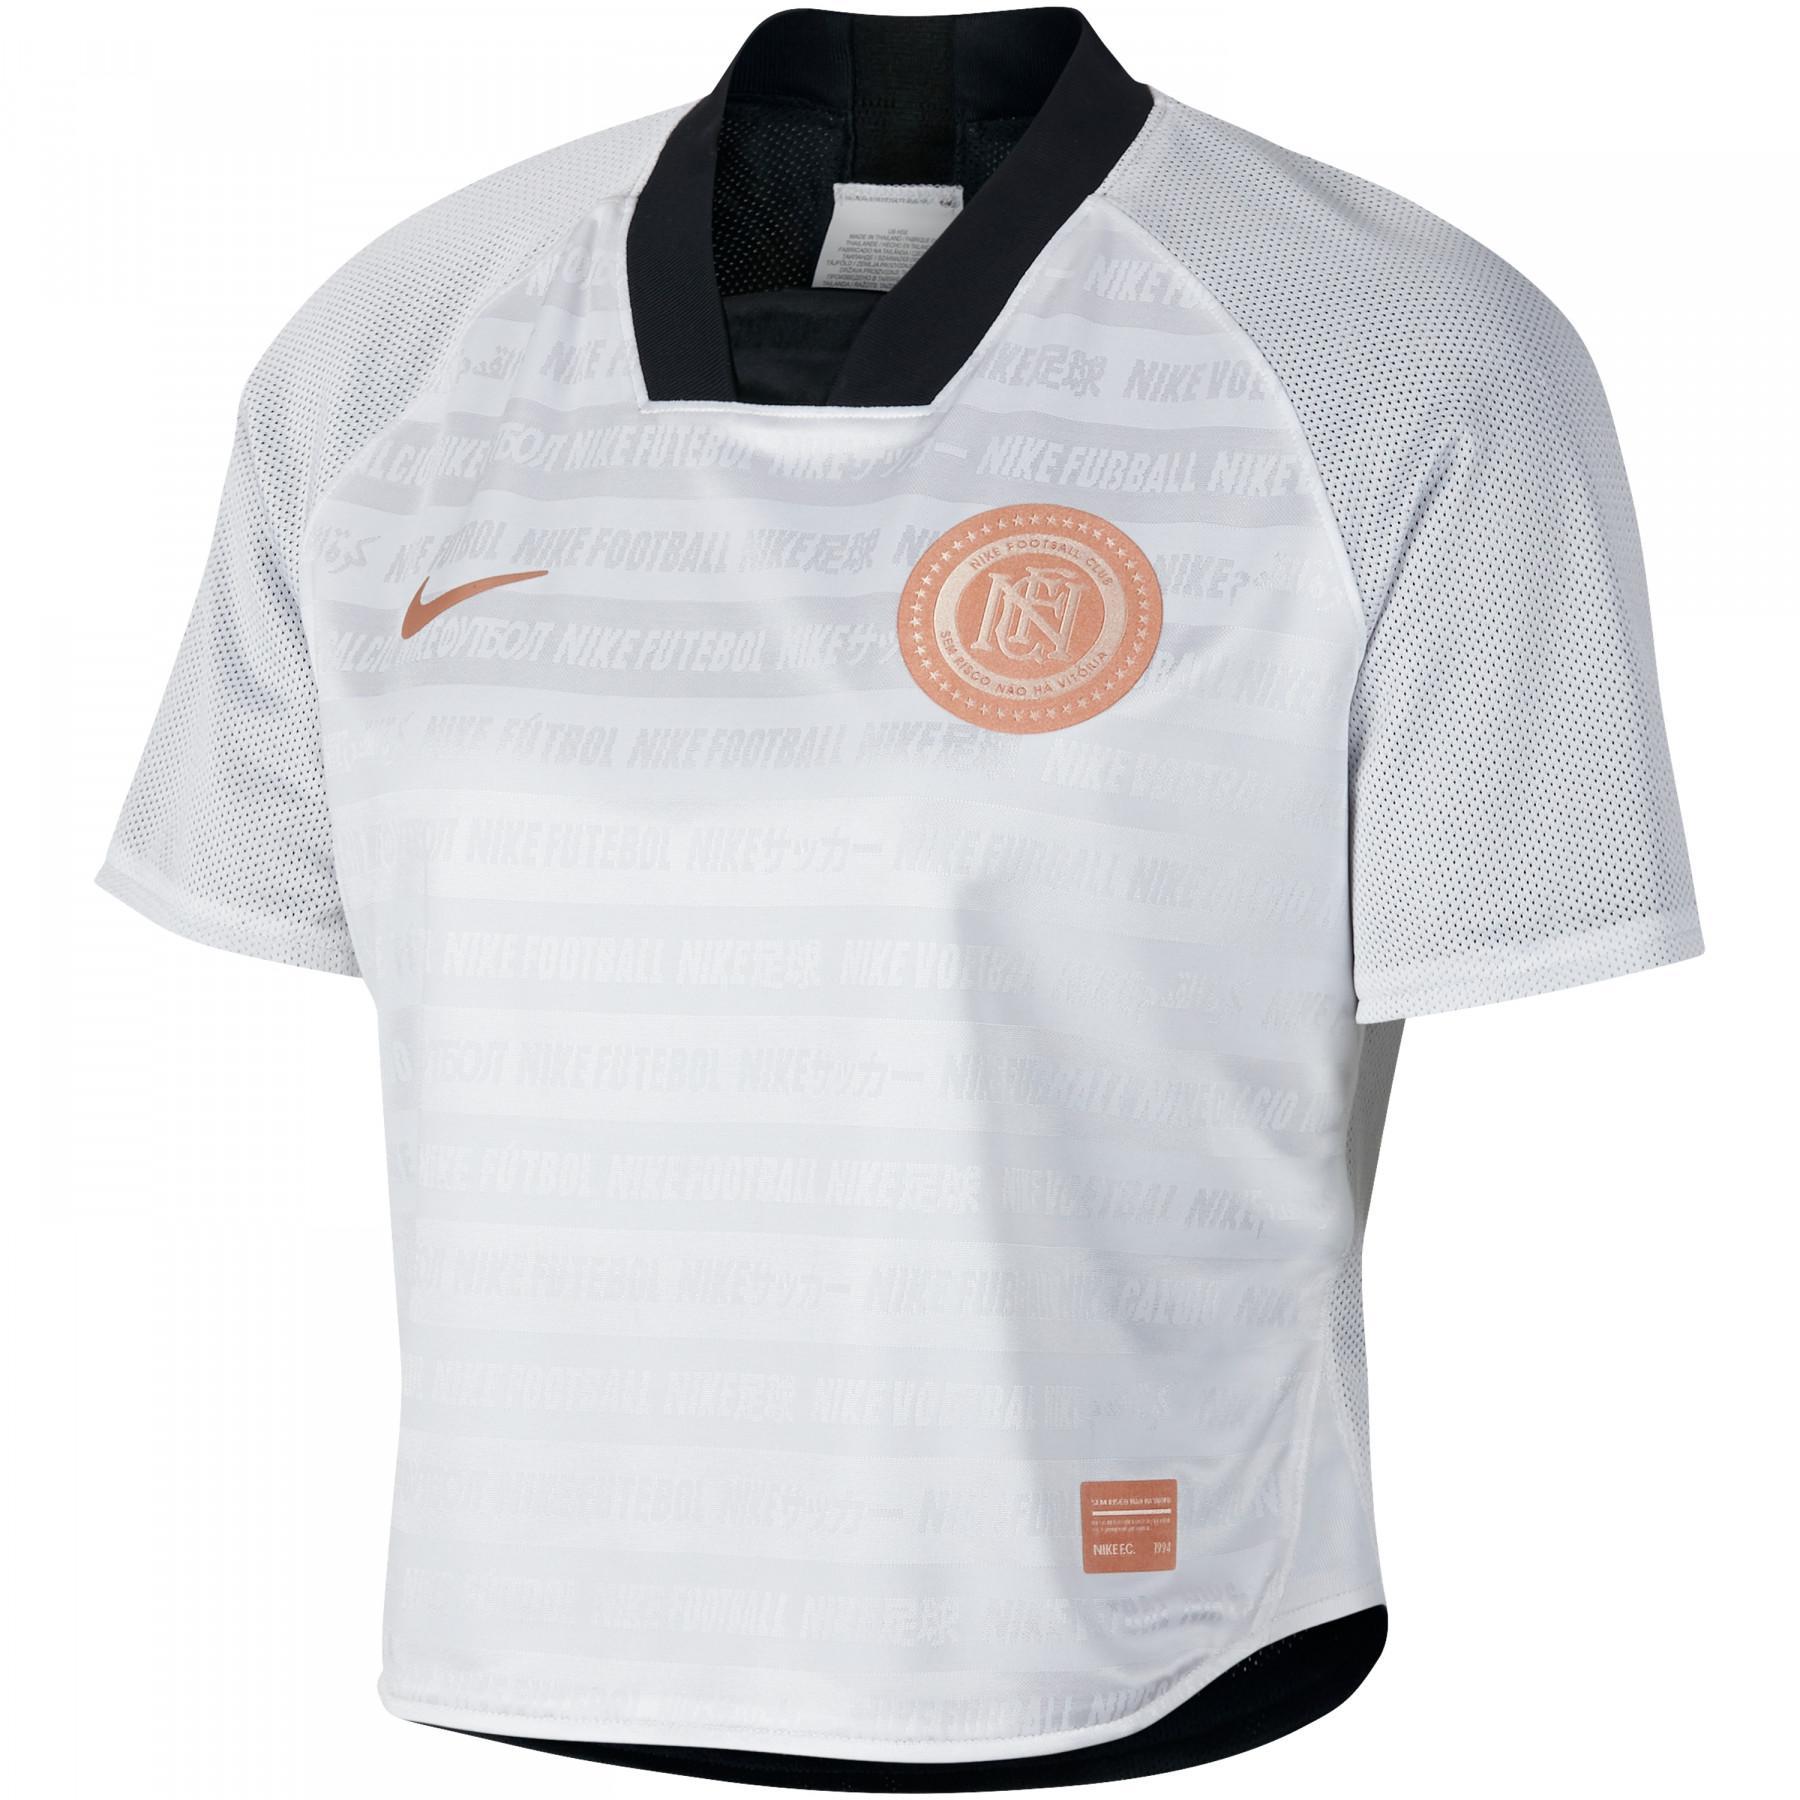 Maillot femme Nike dry FC Top